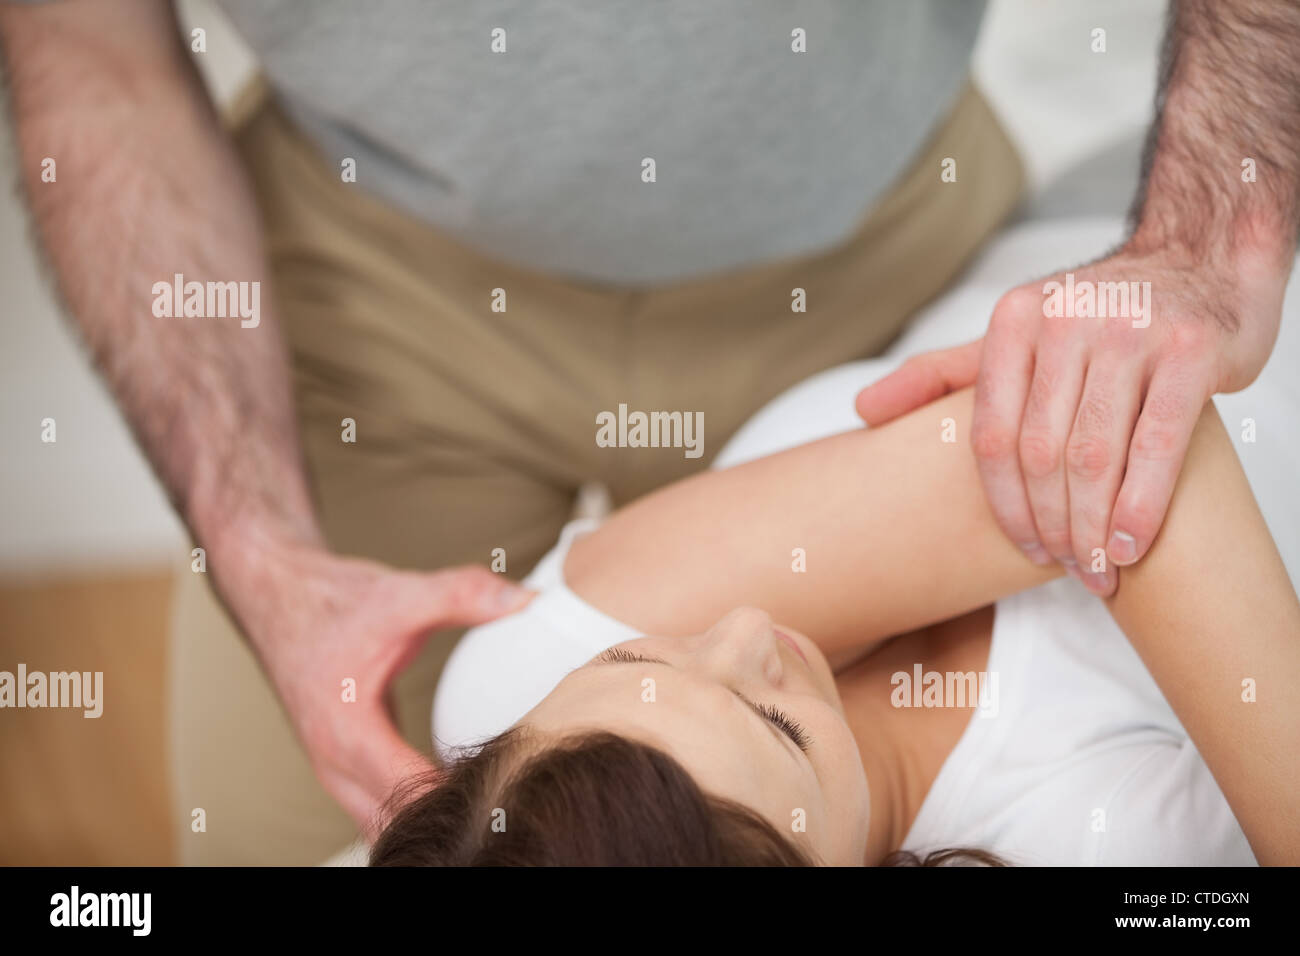 Osteopath making a joint mobilisation Stock Photo